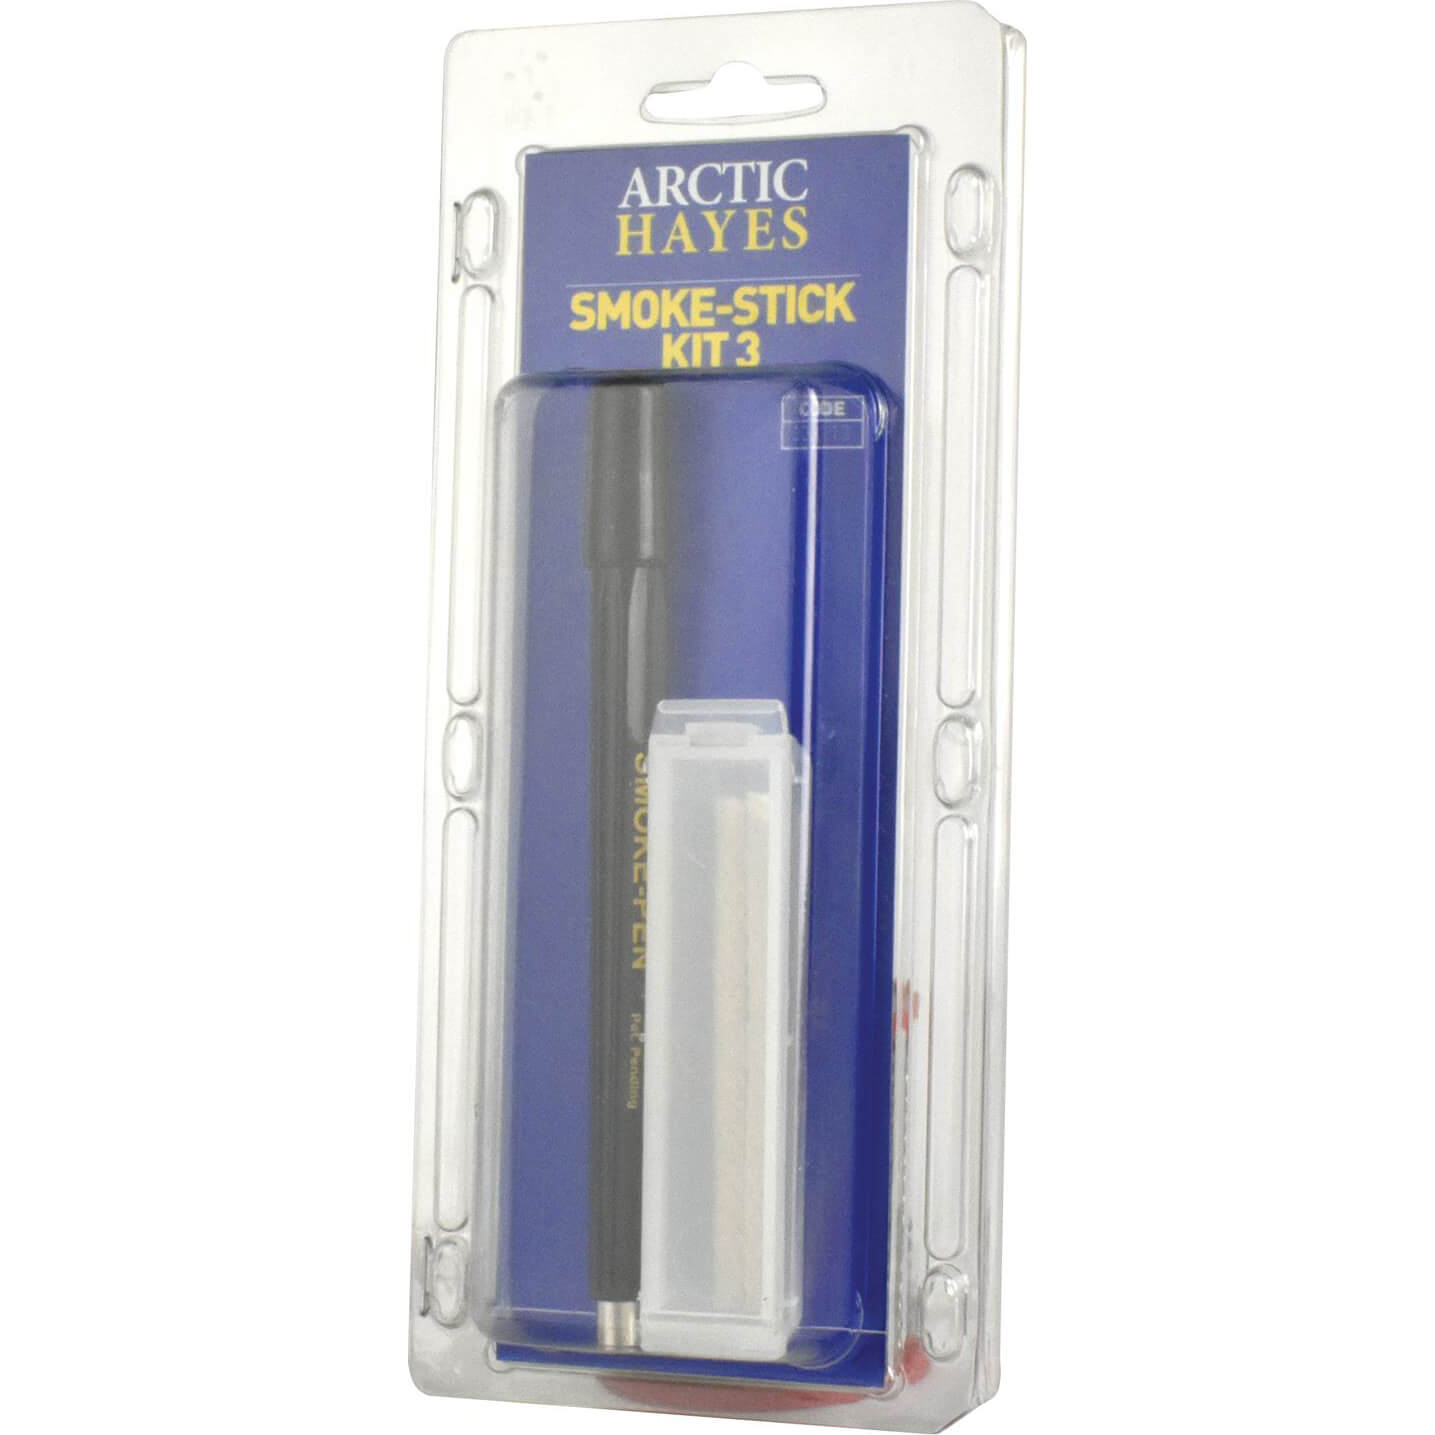 Photos - Other Hand Tools ARCTIC Hayes Smoke Stick Kit 333113 